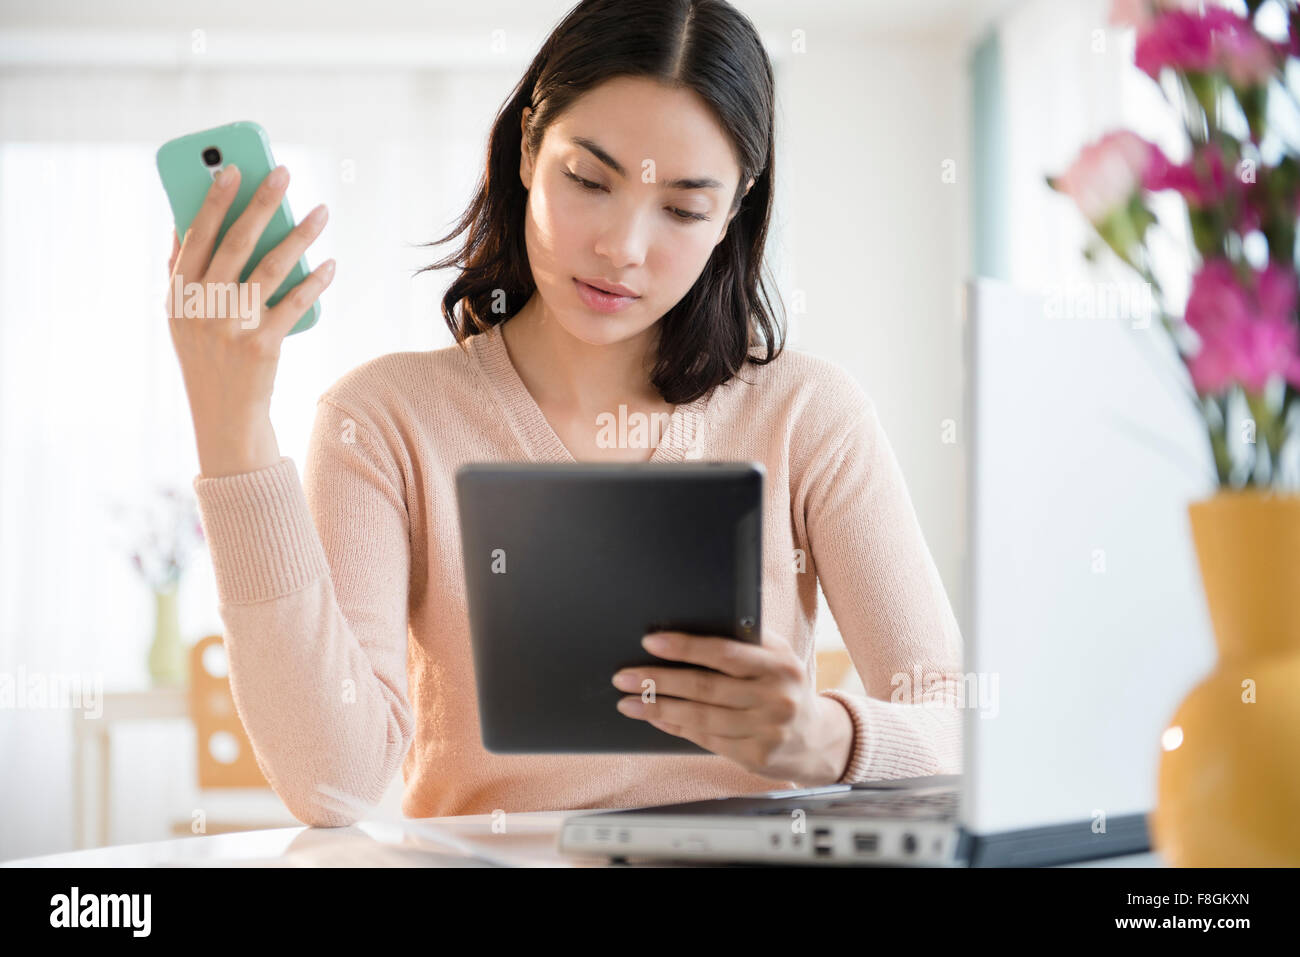 Hispanic woman using cell phone and digital tablet Stock Photo